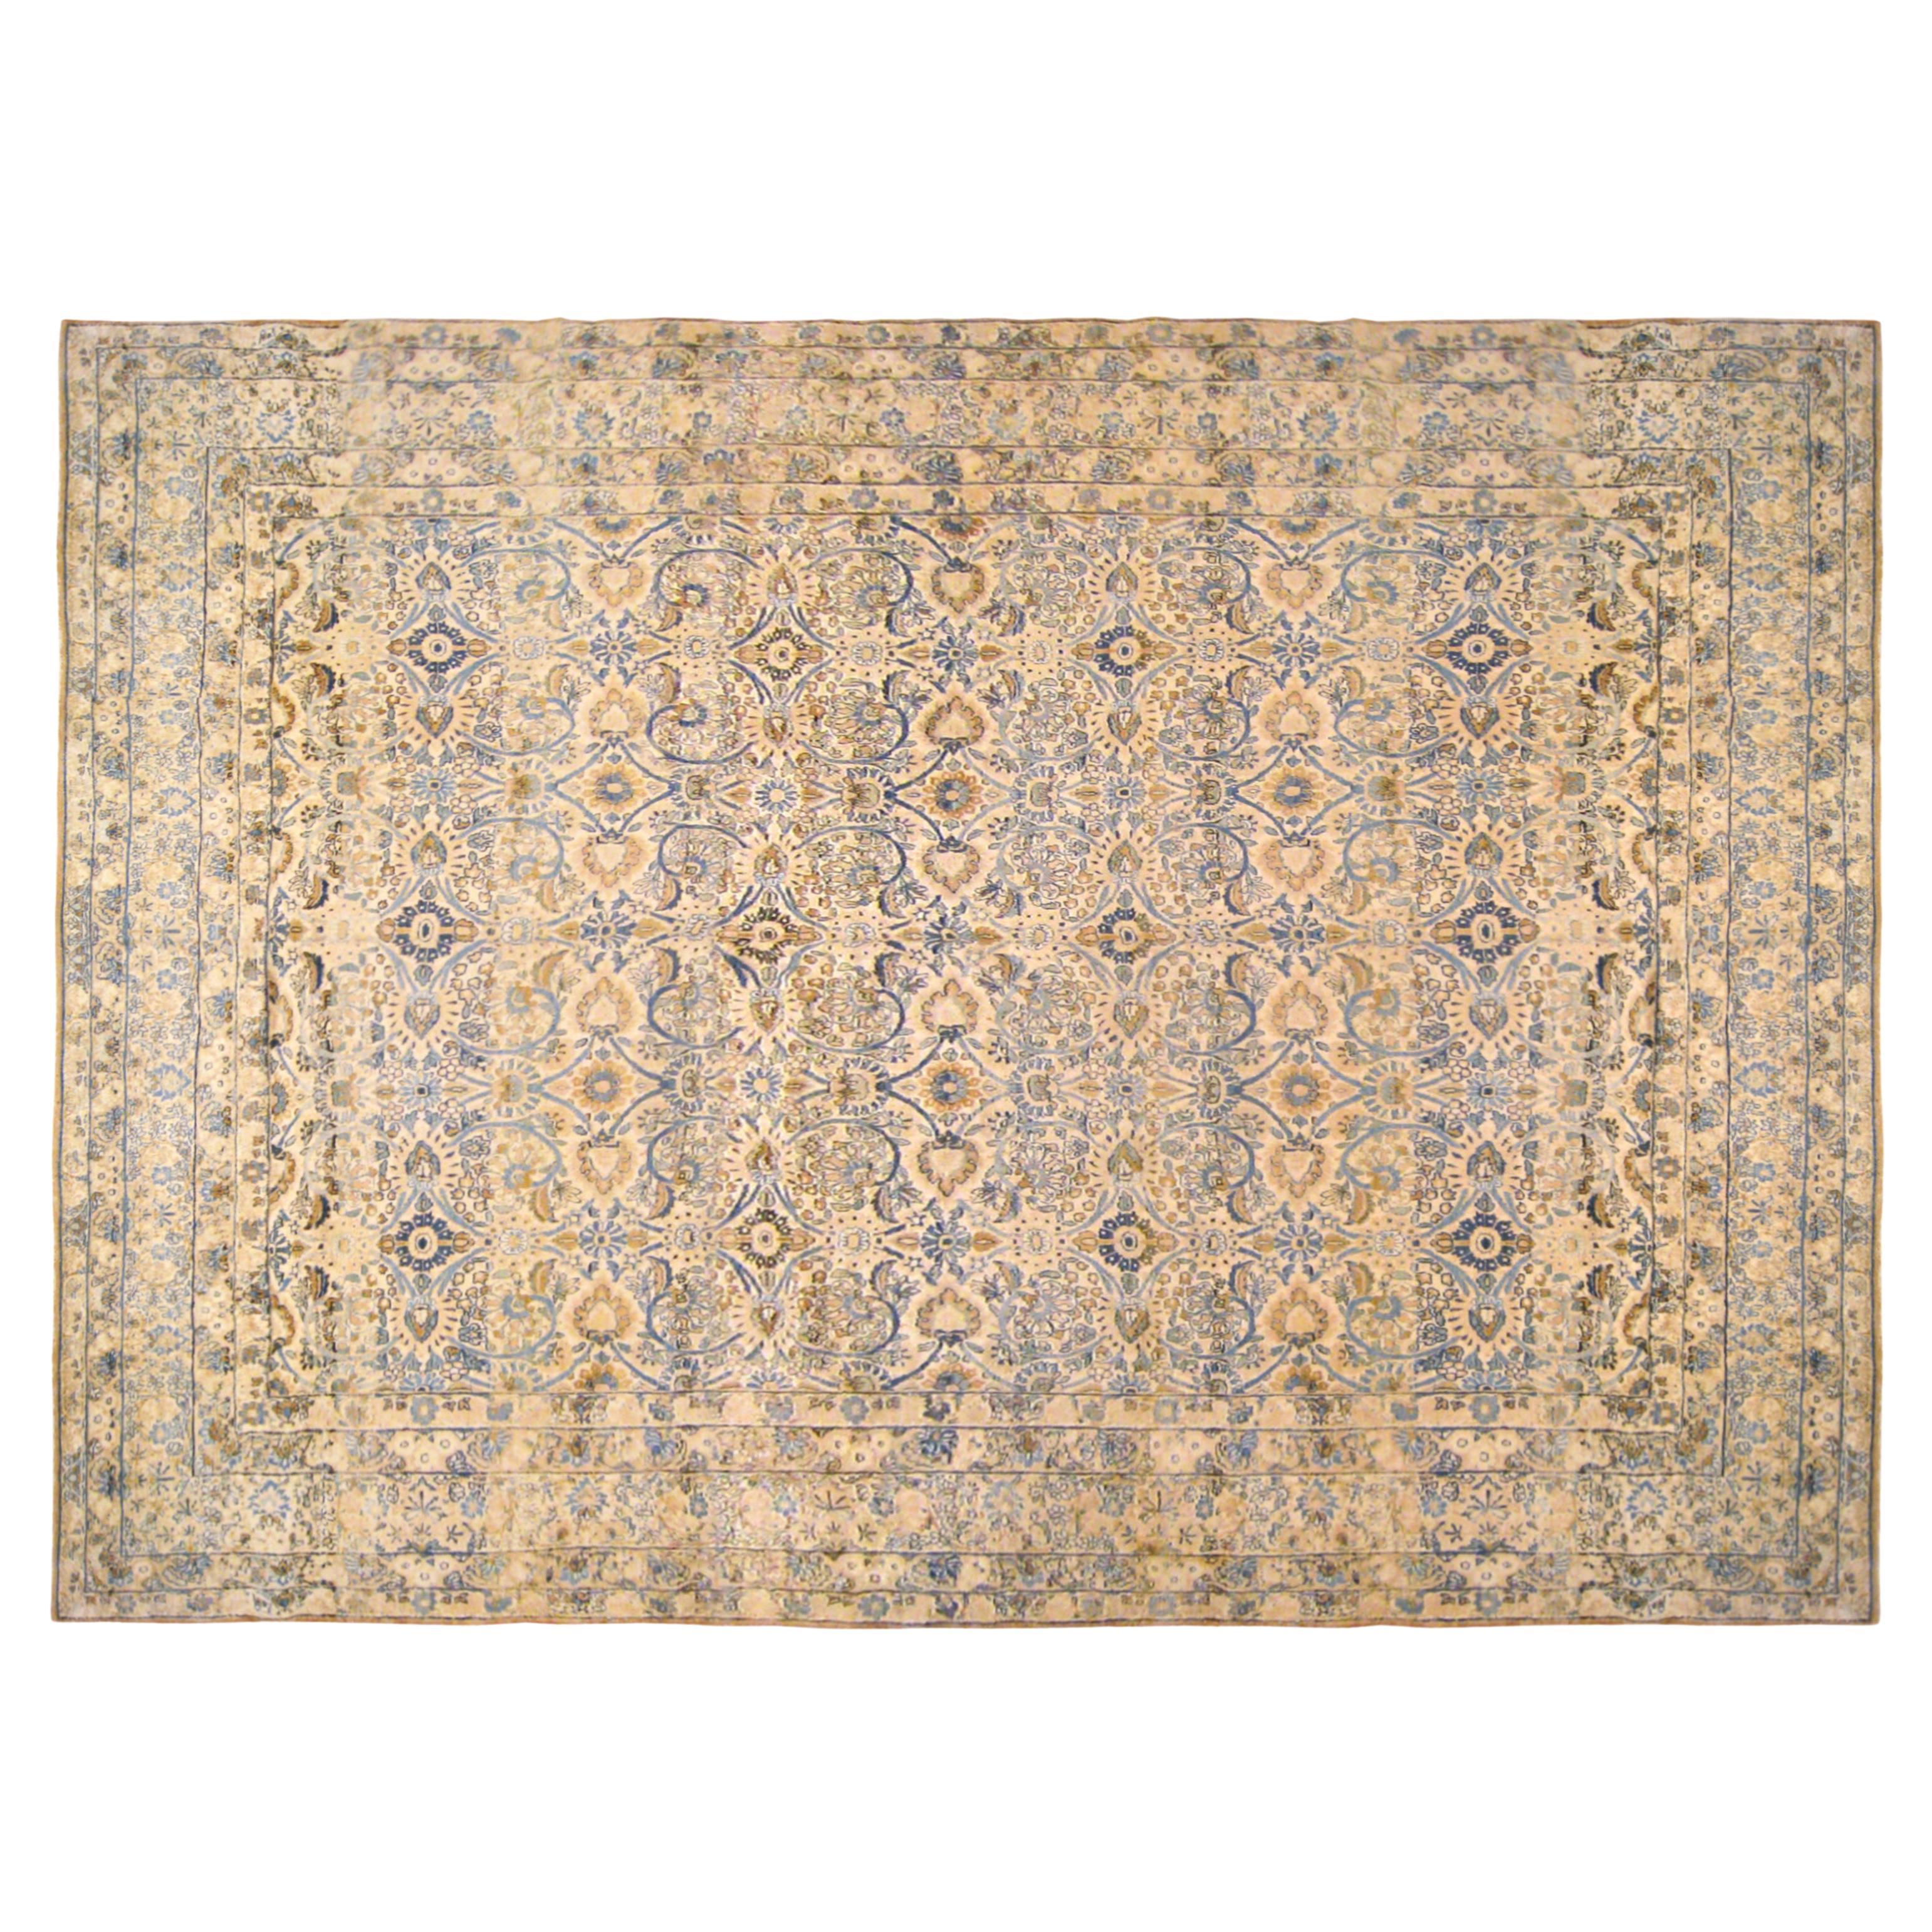 Antique Persian Lavar Oriental Carpet, in Room Size, with a Repeating Design